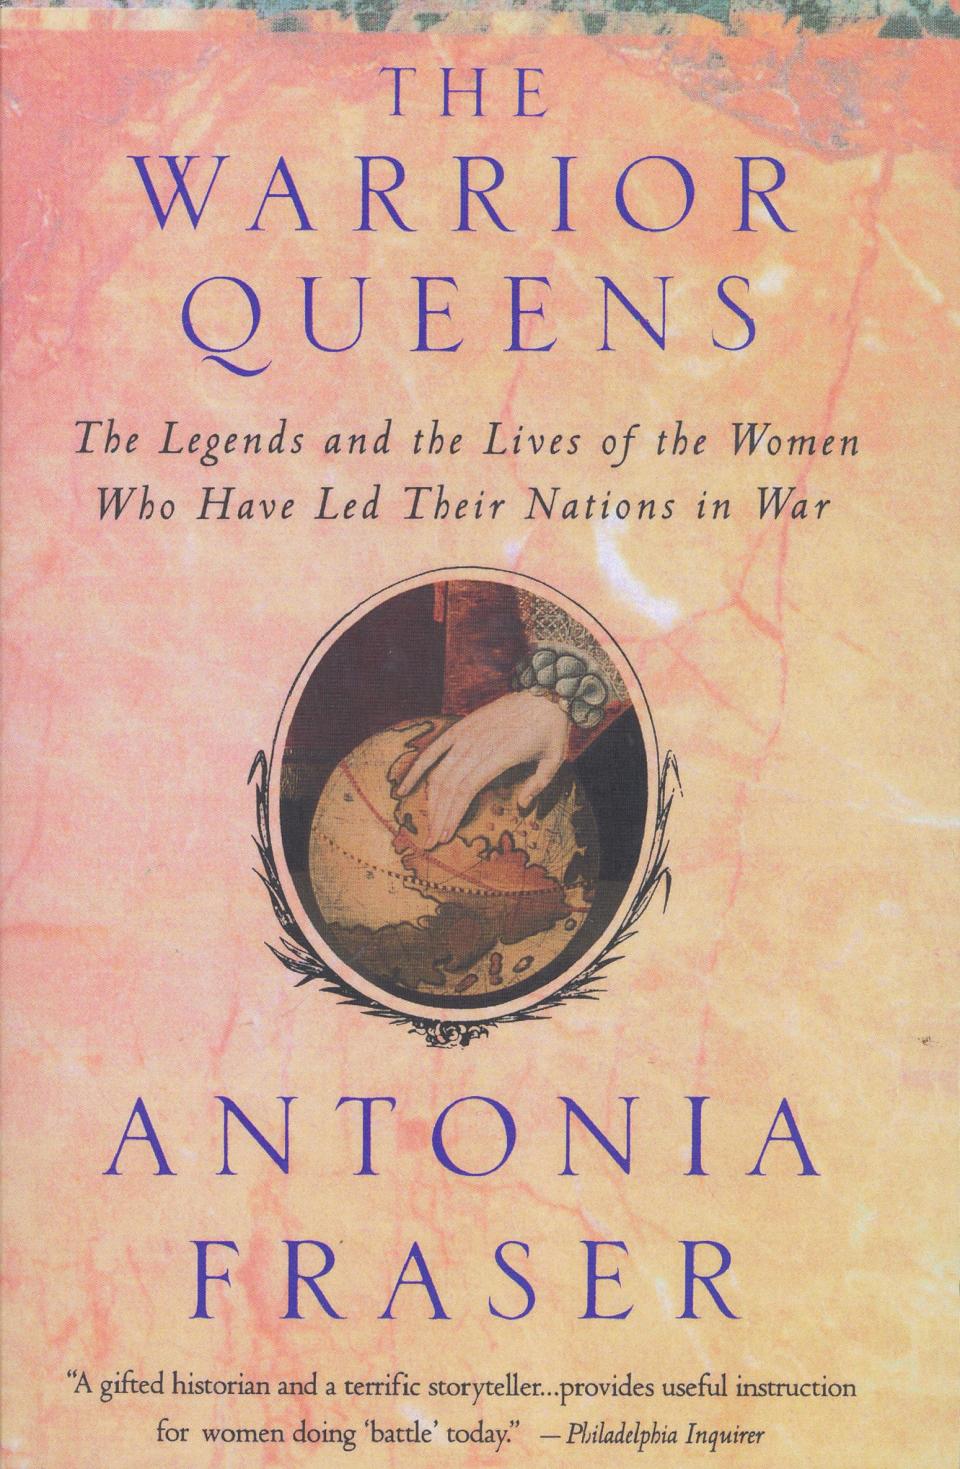 "The Warrior Queens" by Antonia Fraser